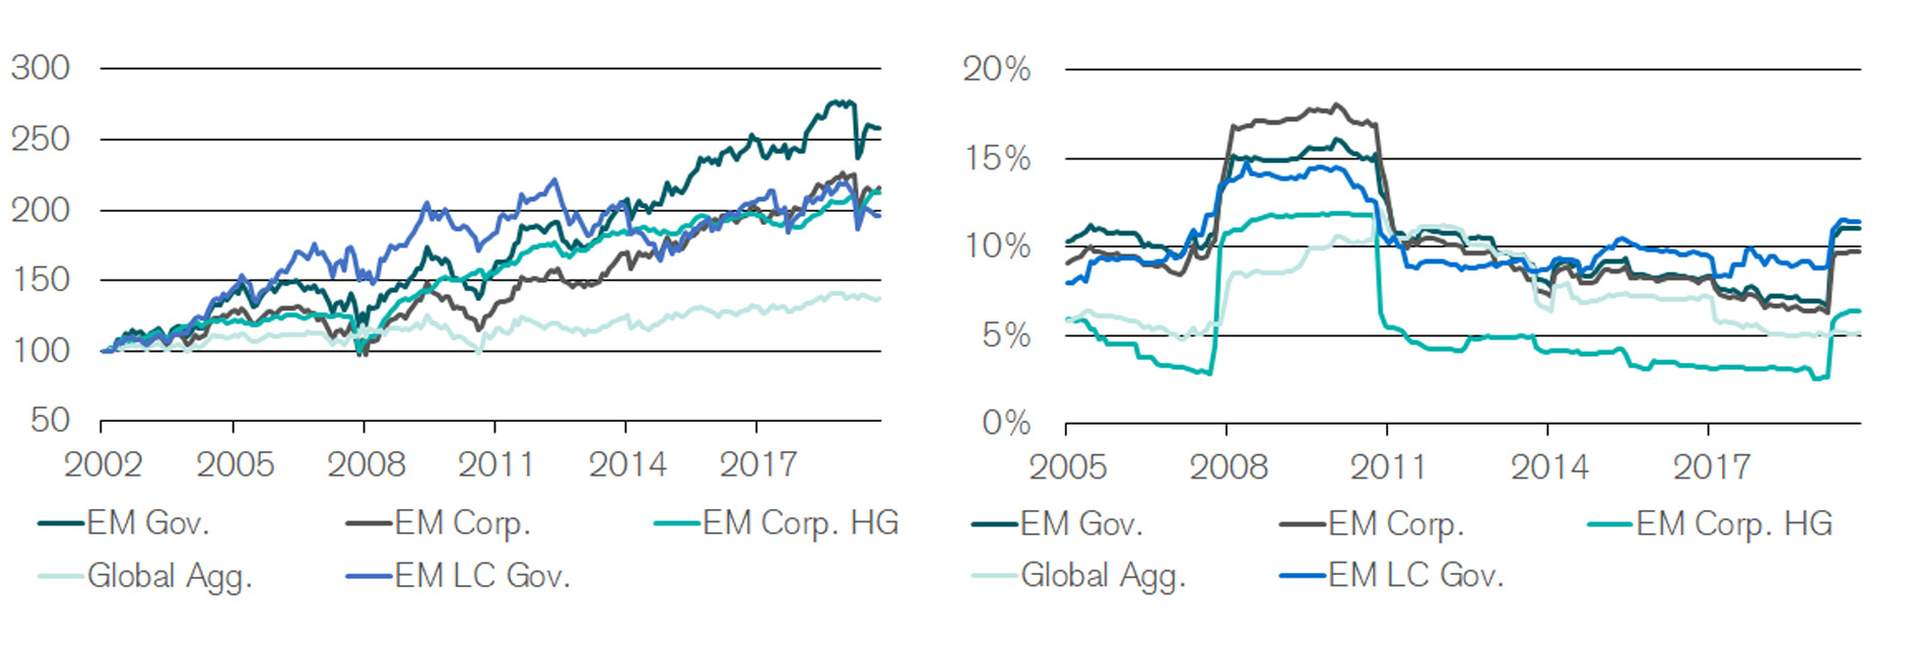 Emerging Markets bonds perform historically clearly better than bonds from the developed countries. The latter, however, exhibit especially in times of crises lower volatility.